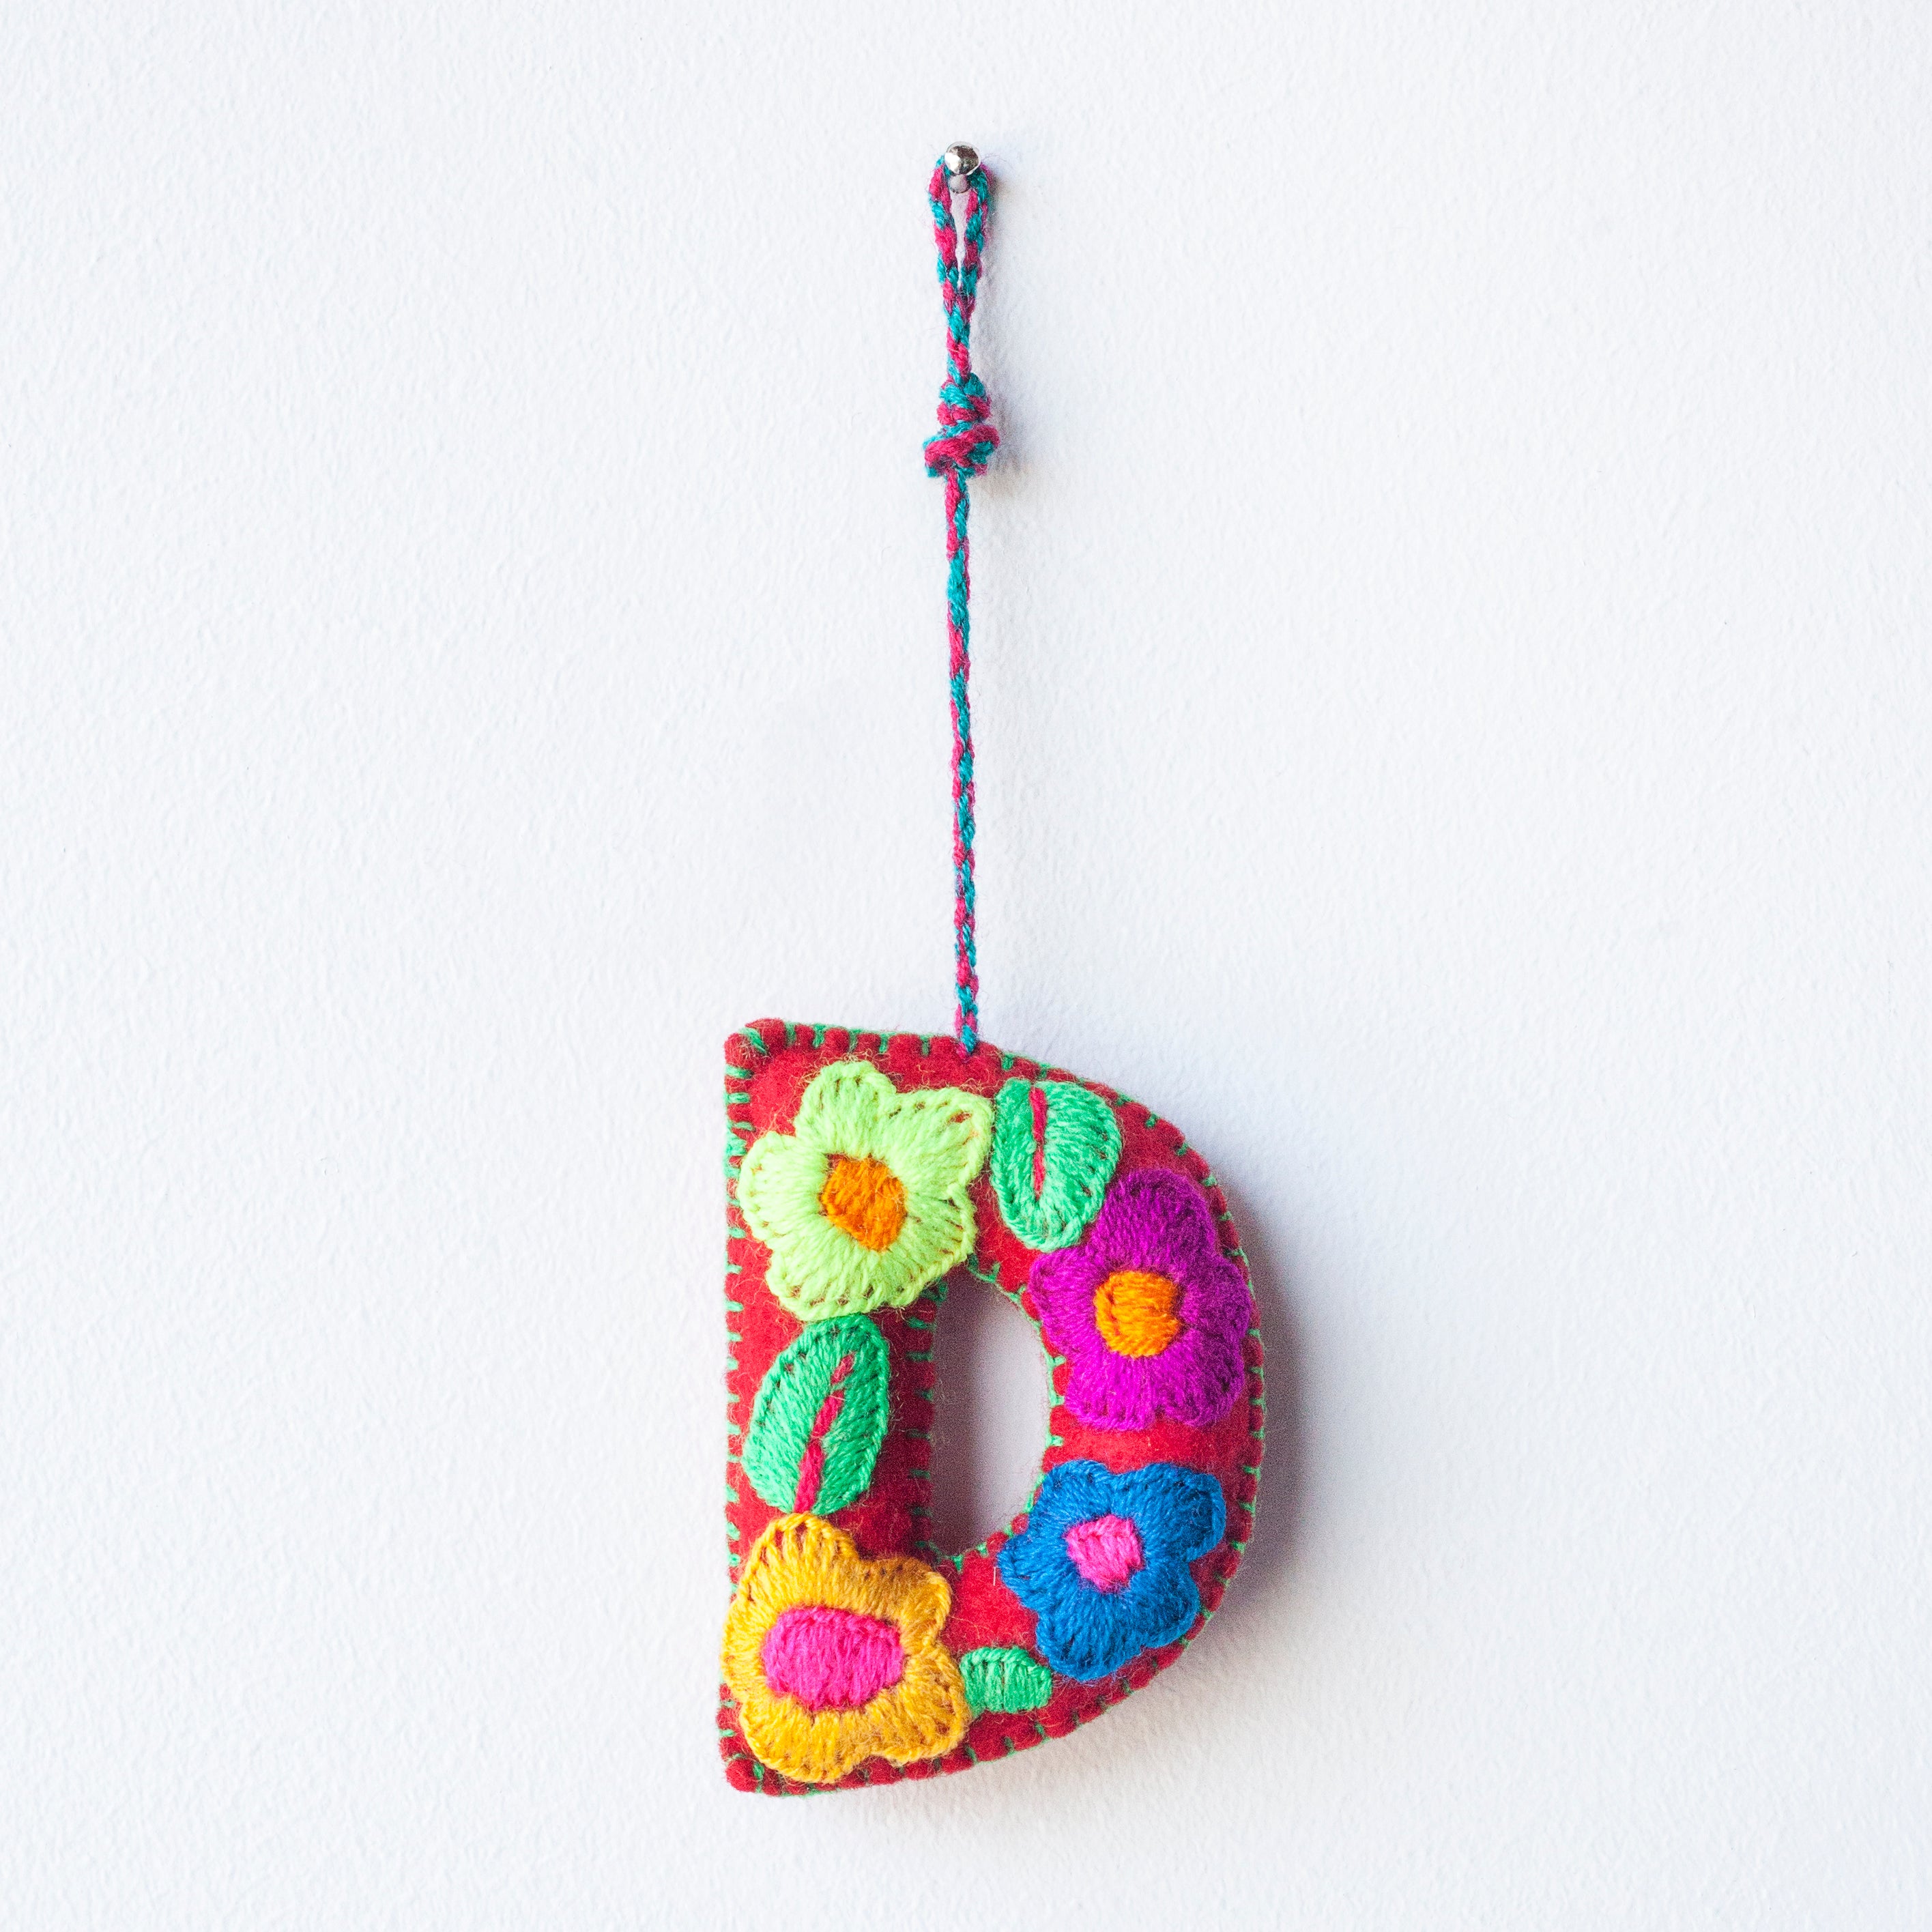 Colorful felt letter "D" with multicolor floral hand-embroidery hanging by a colorful string.